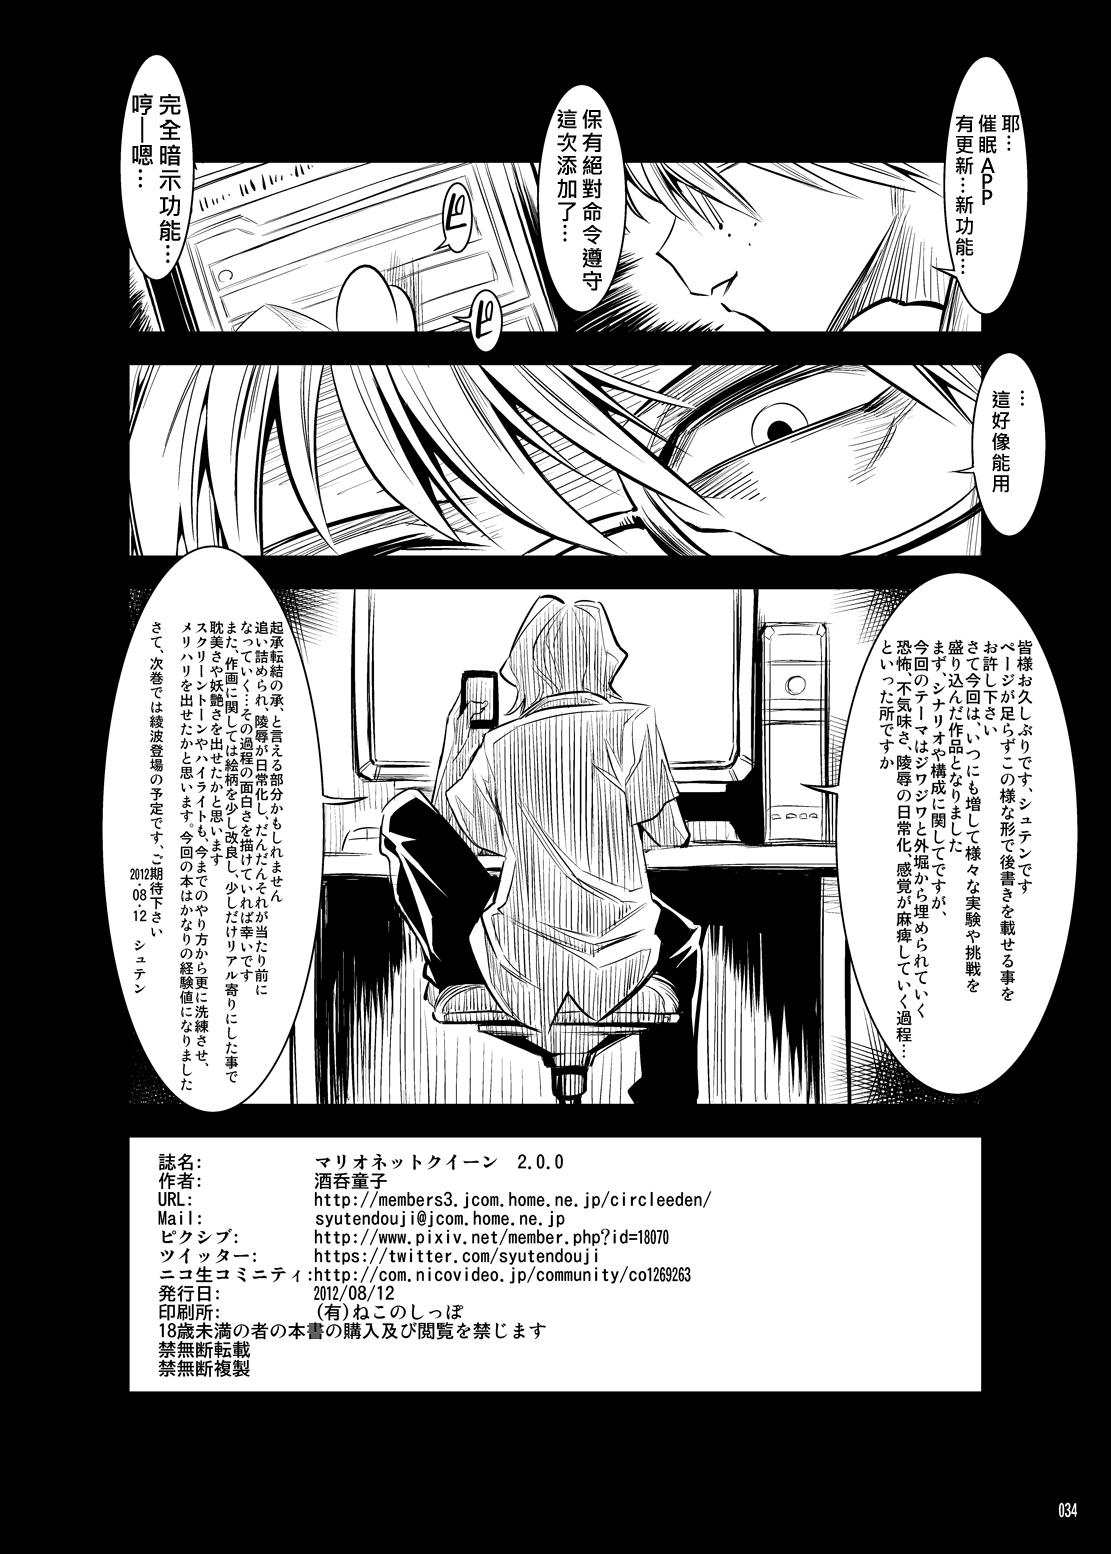 Awesome Marionette Queen 2.0.0 - Neon genesis evangelion Roleplay - Page 33